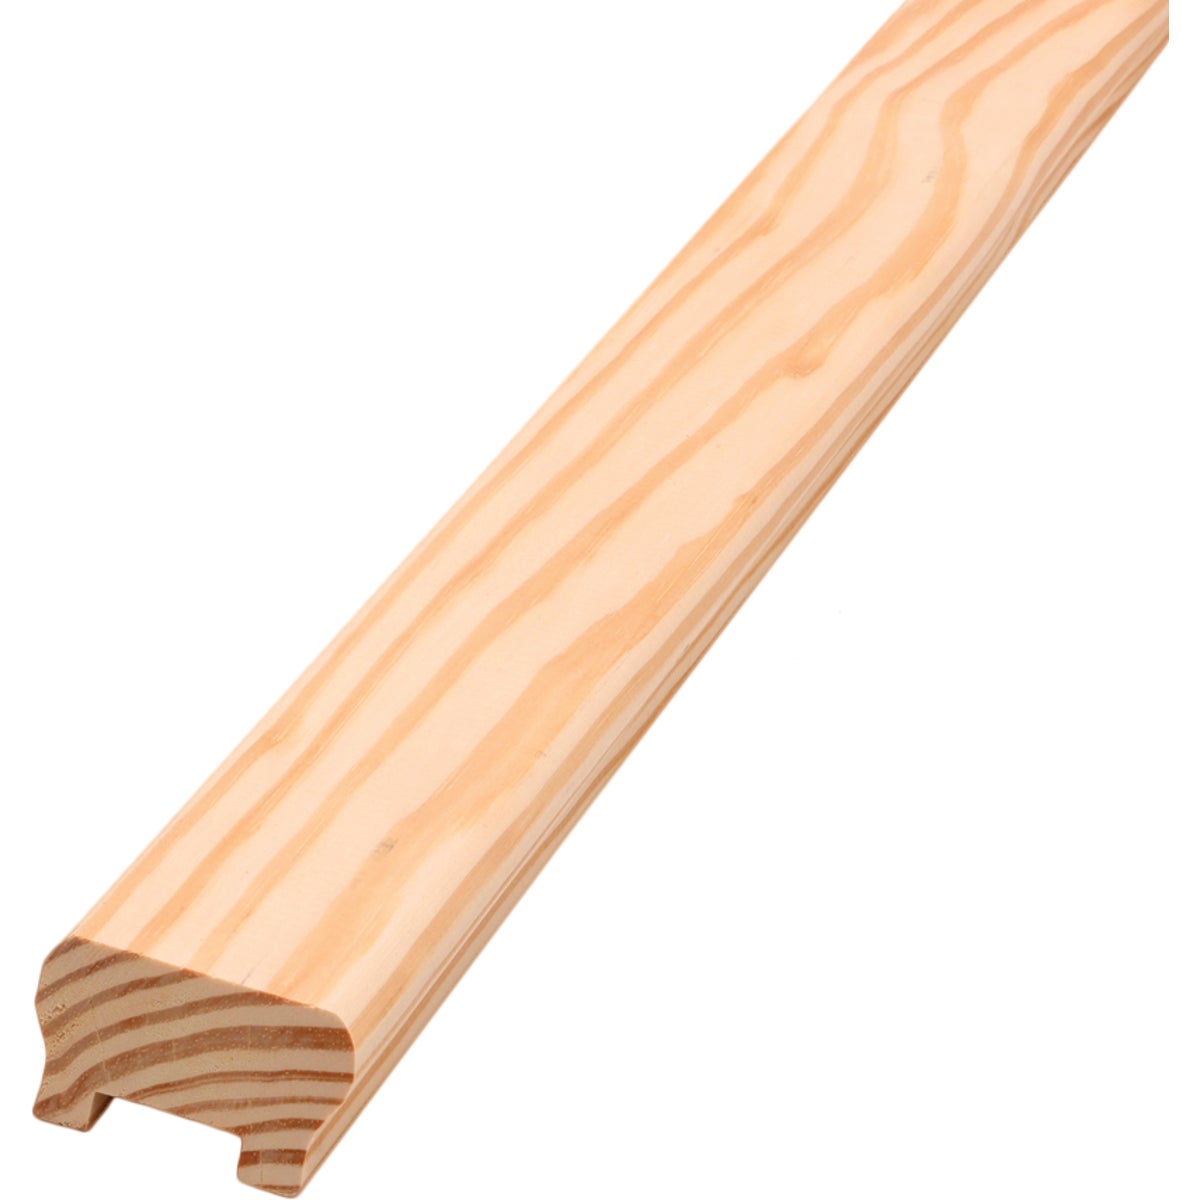 ProWood 2 In. x 4 In. x 8 Ft. Natural Treated Wood Deck Handrail